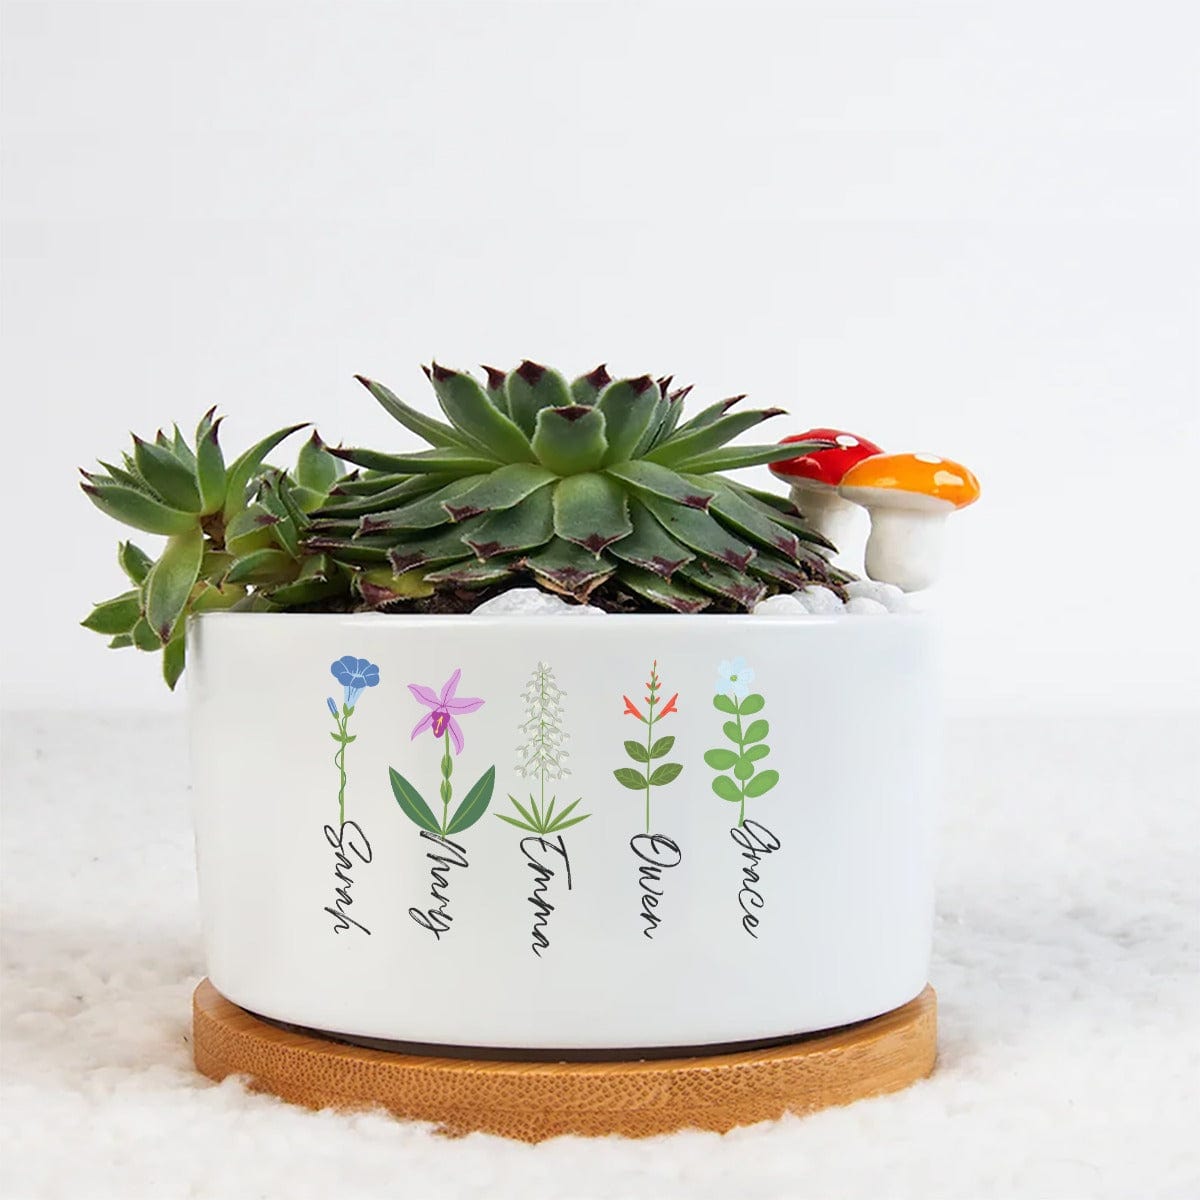 Yoycol M / White Mother's Flowerpot - Customized names of flowers  up to 6 names